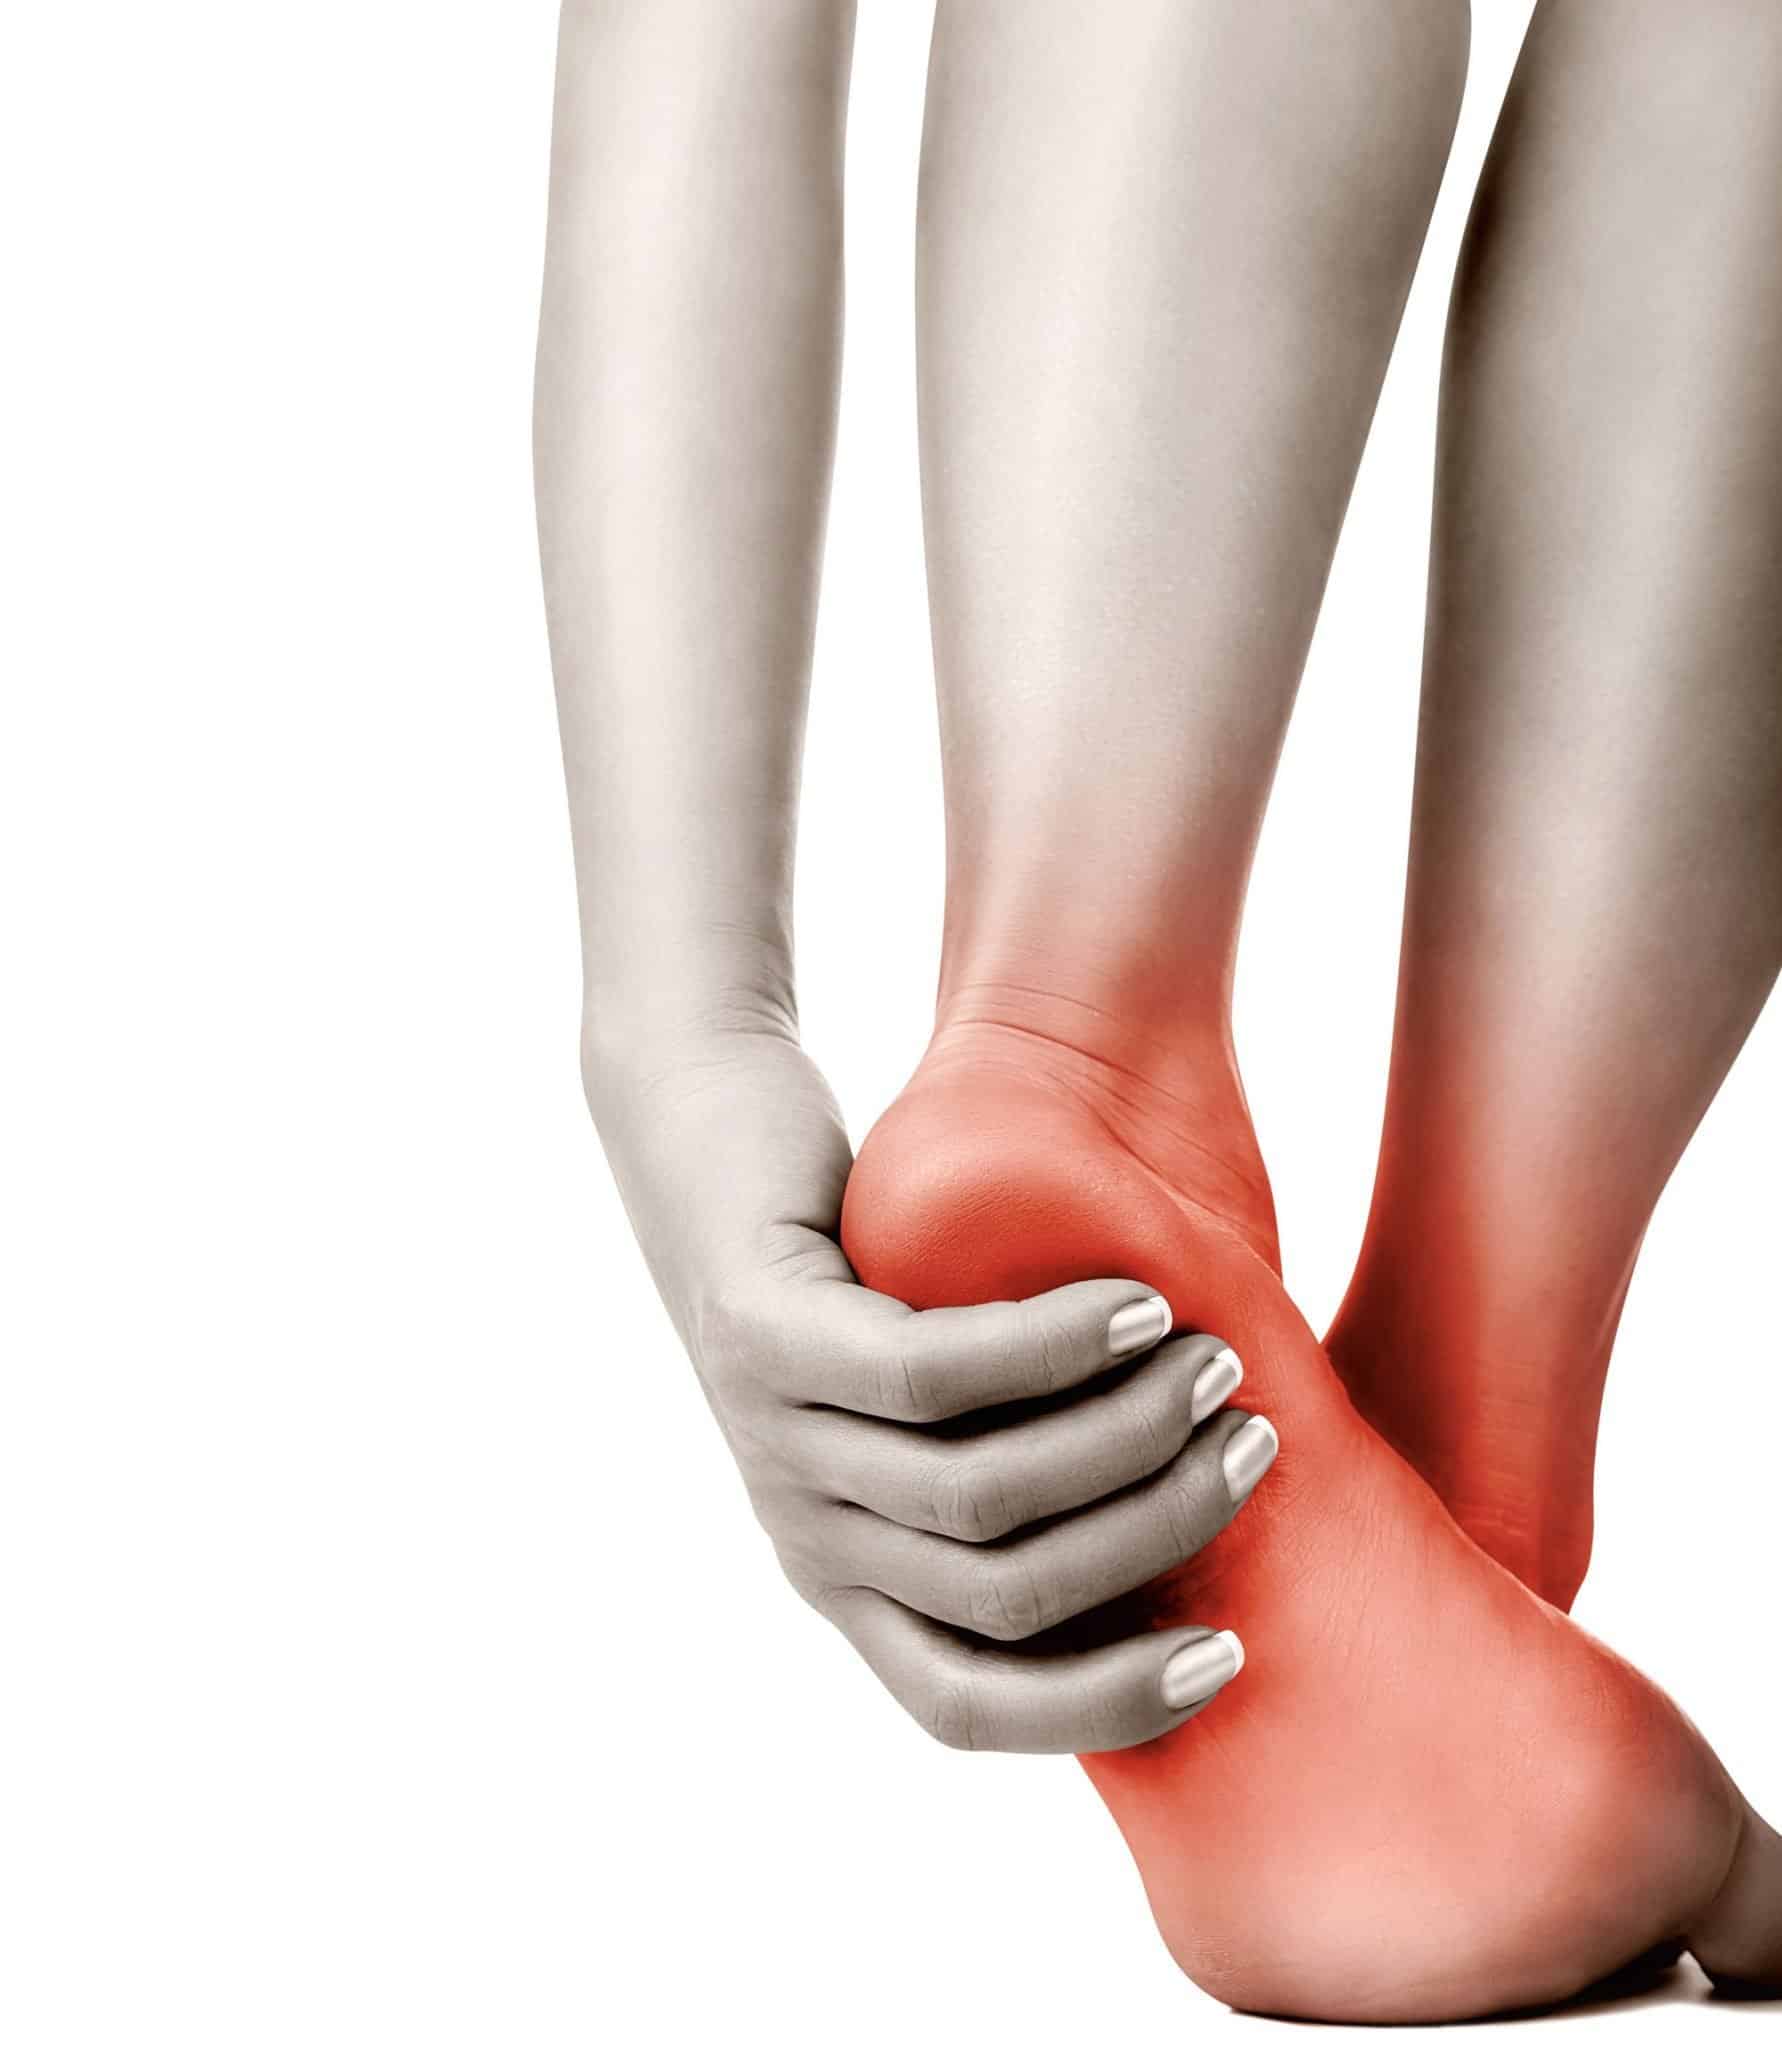 Treating Plantar Fasciitis - With a High Load Strength Training